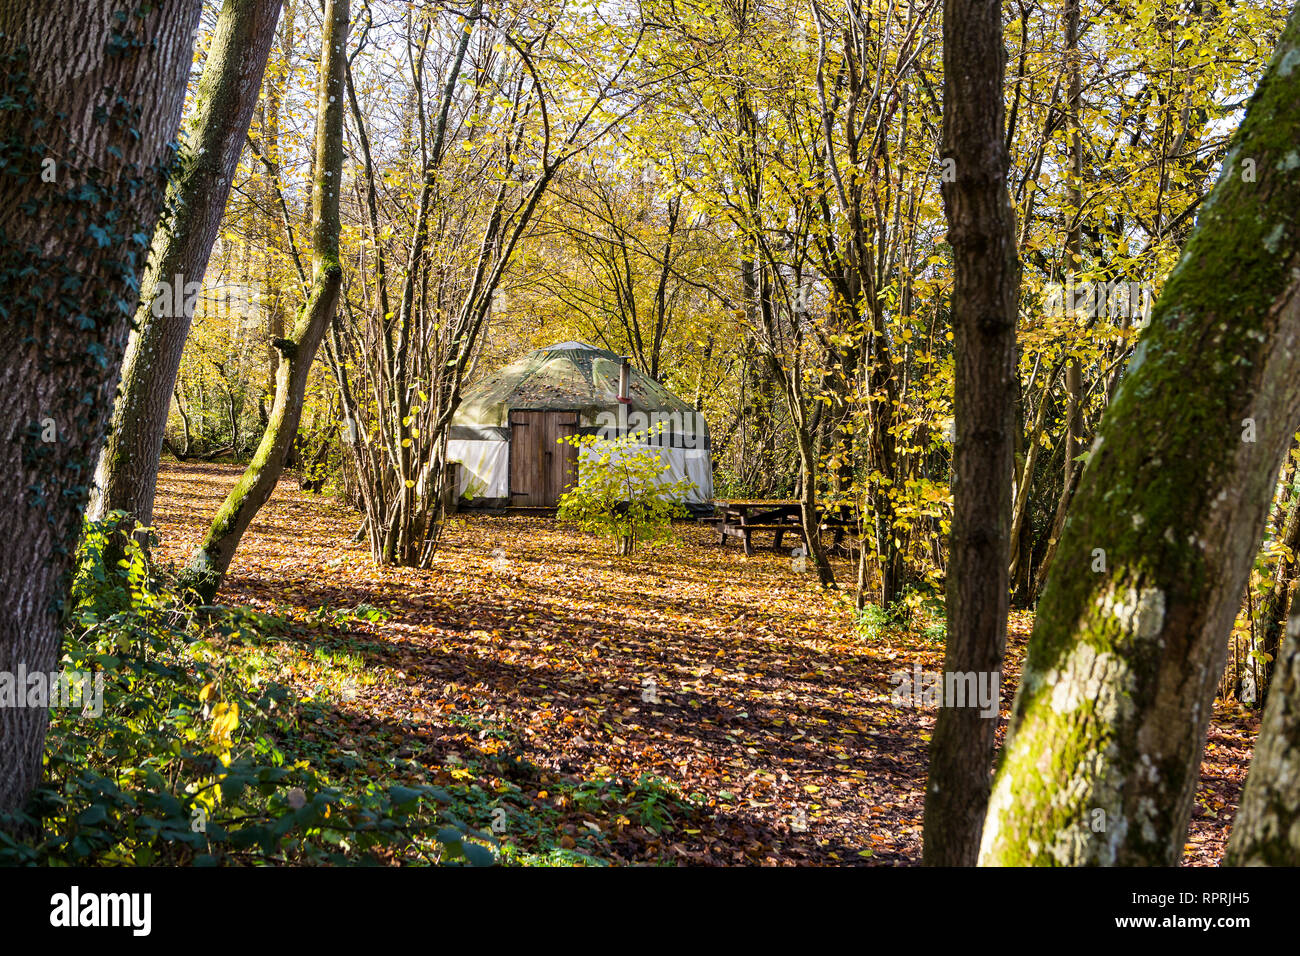 Traditional yurt in the woods, glamping in autumn sunshine Stock Photo